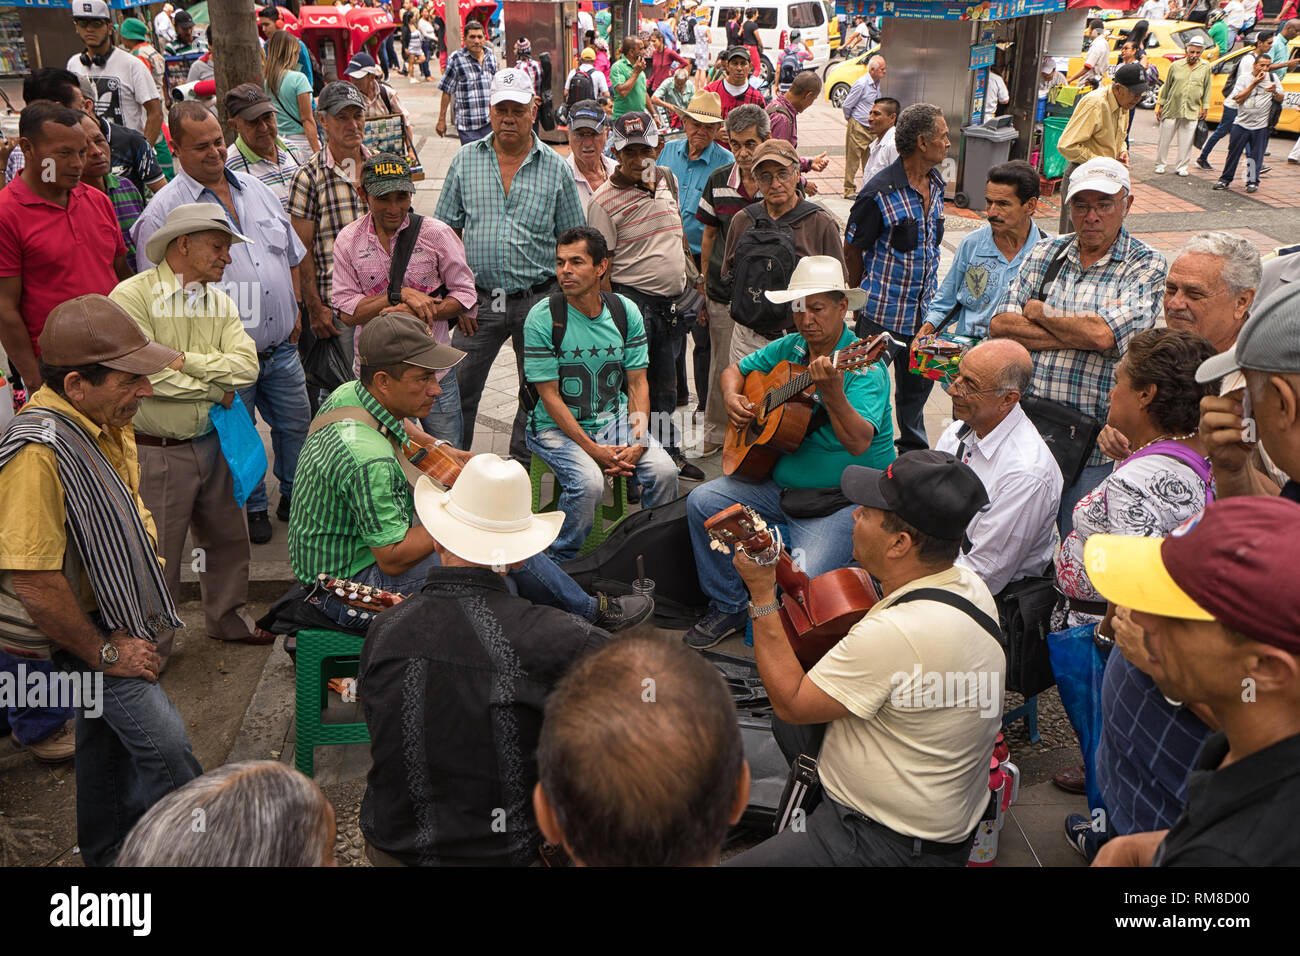 Medellin, Colombia - July 23, 2018: men playing guitars in a park surrounded by people Stock Photo